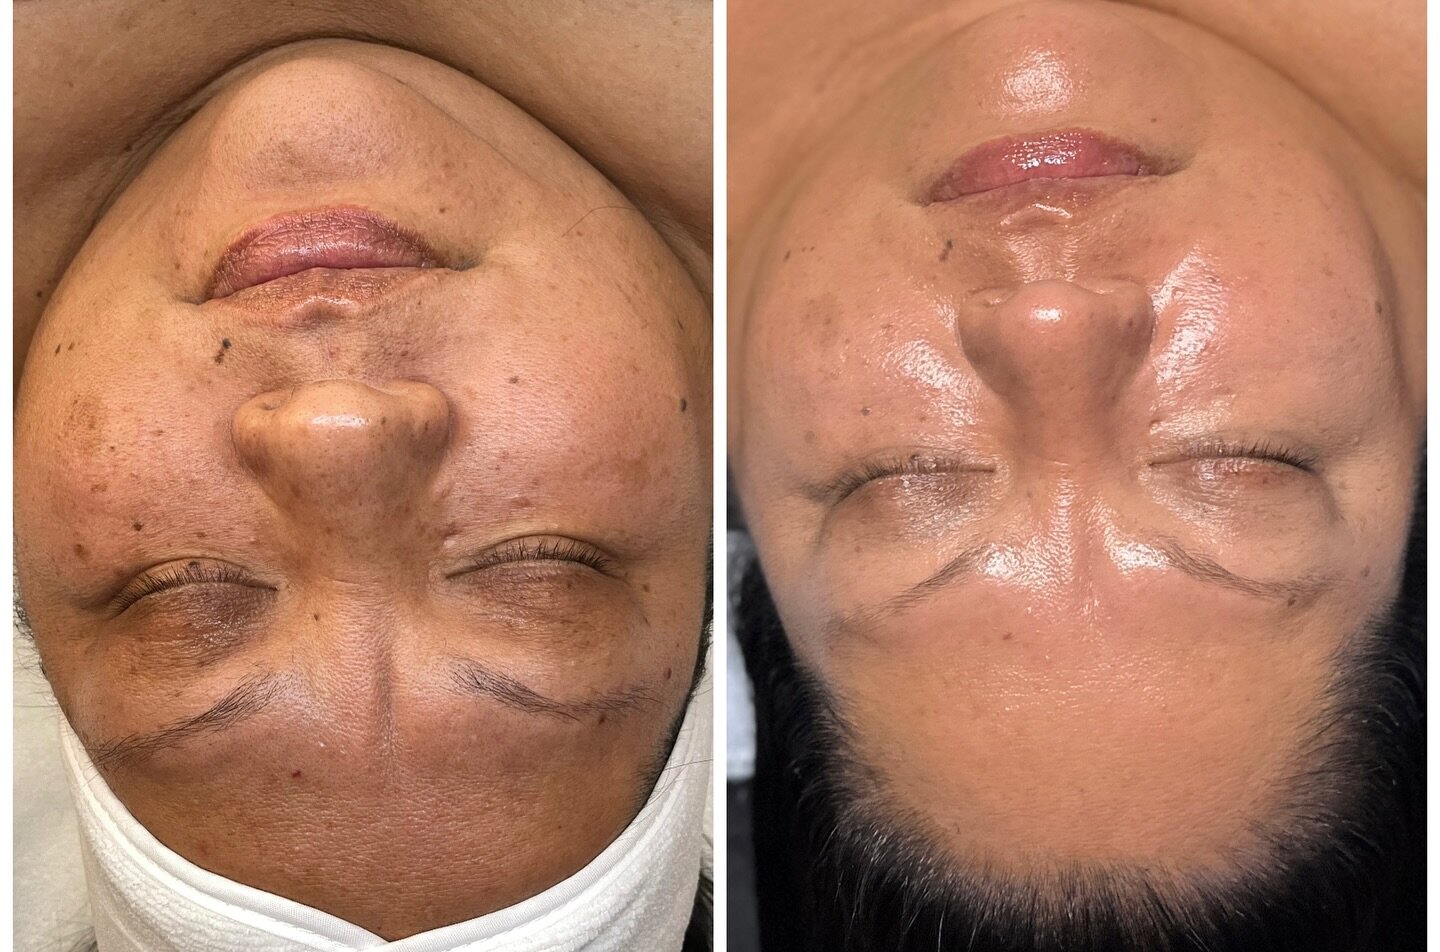 Monthly facials + clinical regimen = happy healthy skin 🩷💙

Going on 3 years with this beautiful lady🥹

&mdash;&mdash;&mdash;

You can purchase my online skin care consultation through the link in my bio and get a specialized treatment + skin care